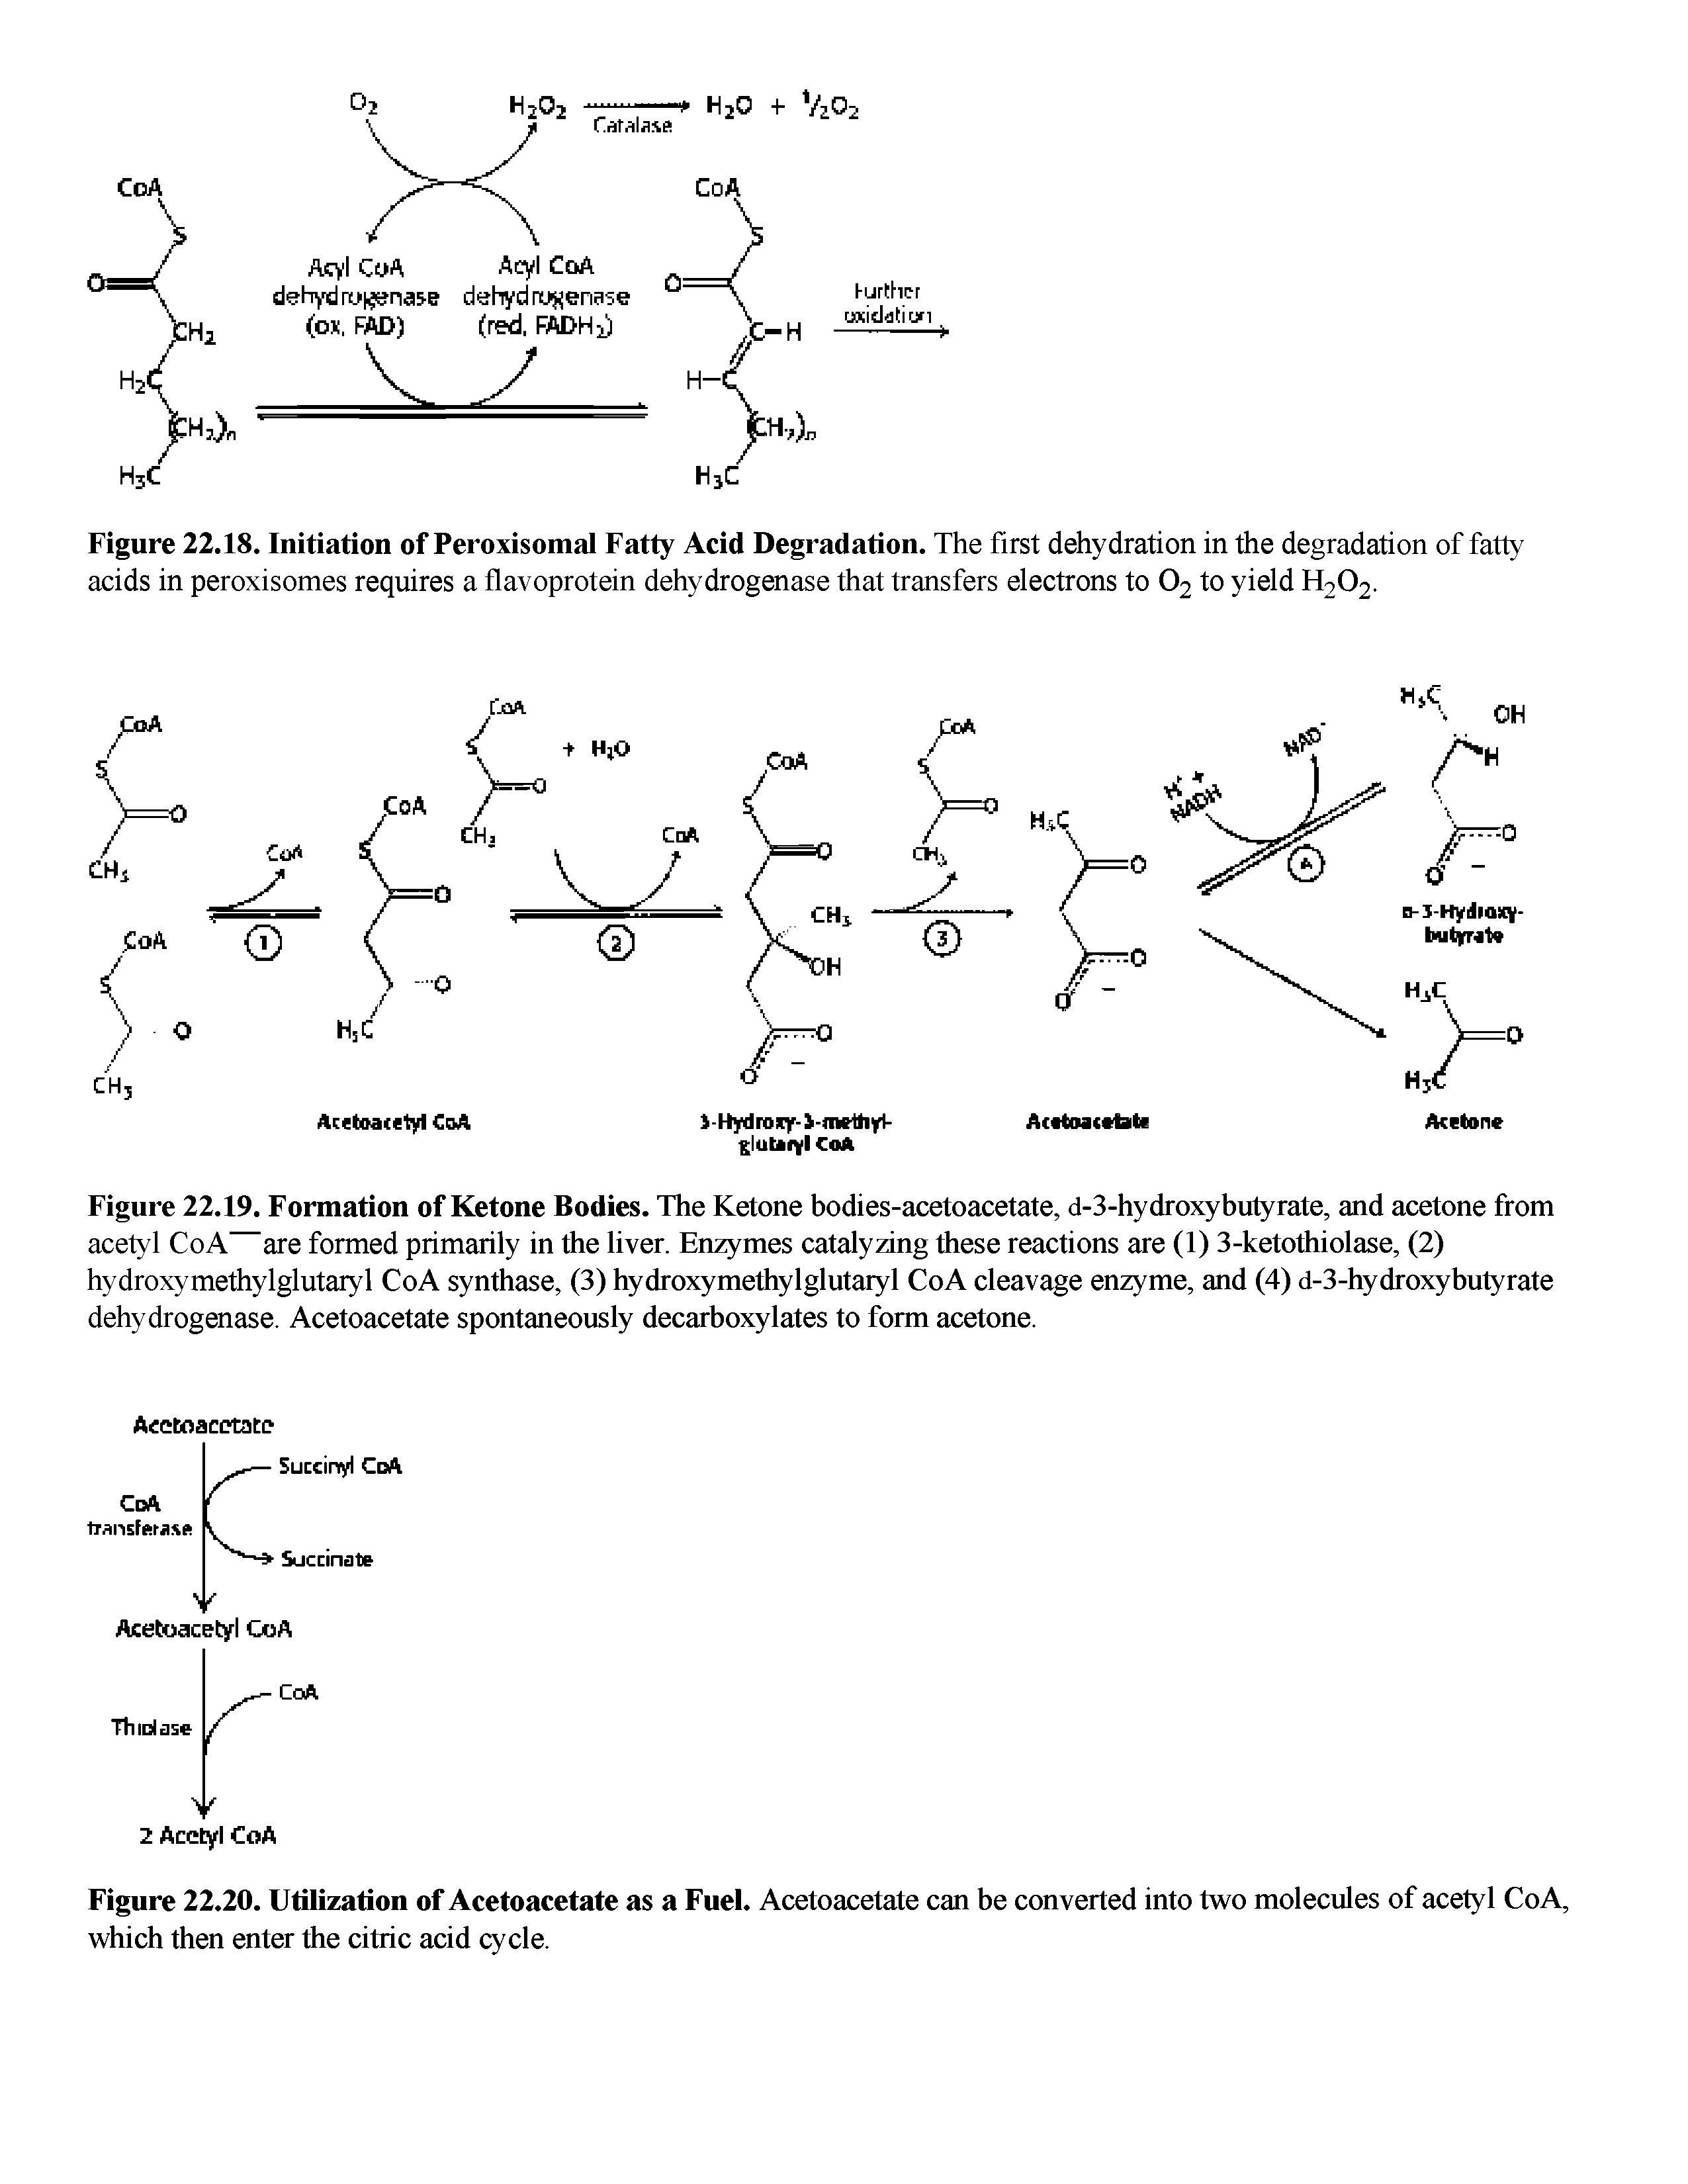 Figure 22.19. Formation of Ketone Bodies. The Ketone bodies-acetoacetate, d-3-hydroxybutyrate, and acetone from acetyl CoA are formed primarily in the liver. Enzymes catalyzing these reactions are (1) 3-ketothiolase, (2) hydroxymethylglutaryl CoA synthase, (3) hydroxymethylglutaryl CoA cleavage enzyme, and (4) d-3-hydroxybutyrate dehydrogenase. Acetoacetate spontaneously decarboxylates to form acetone.